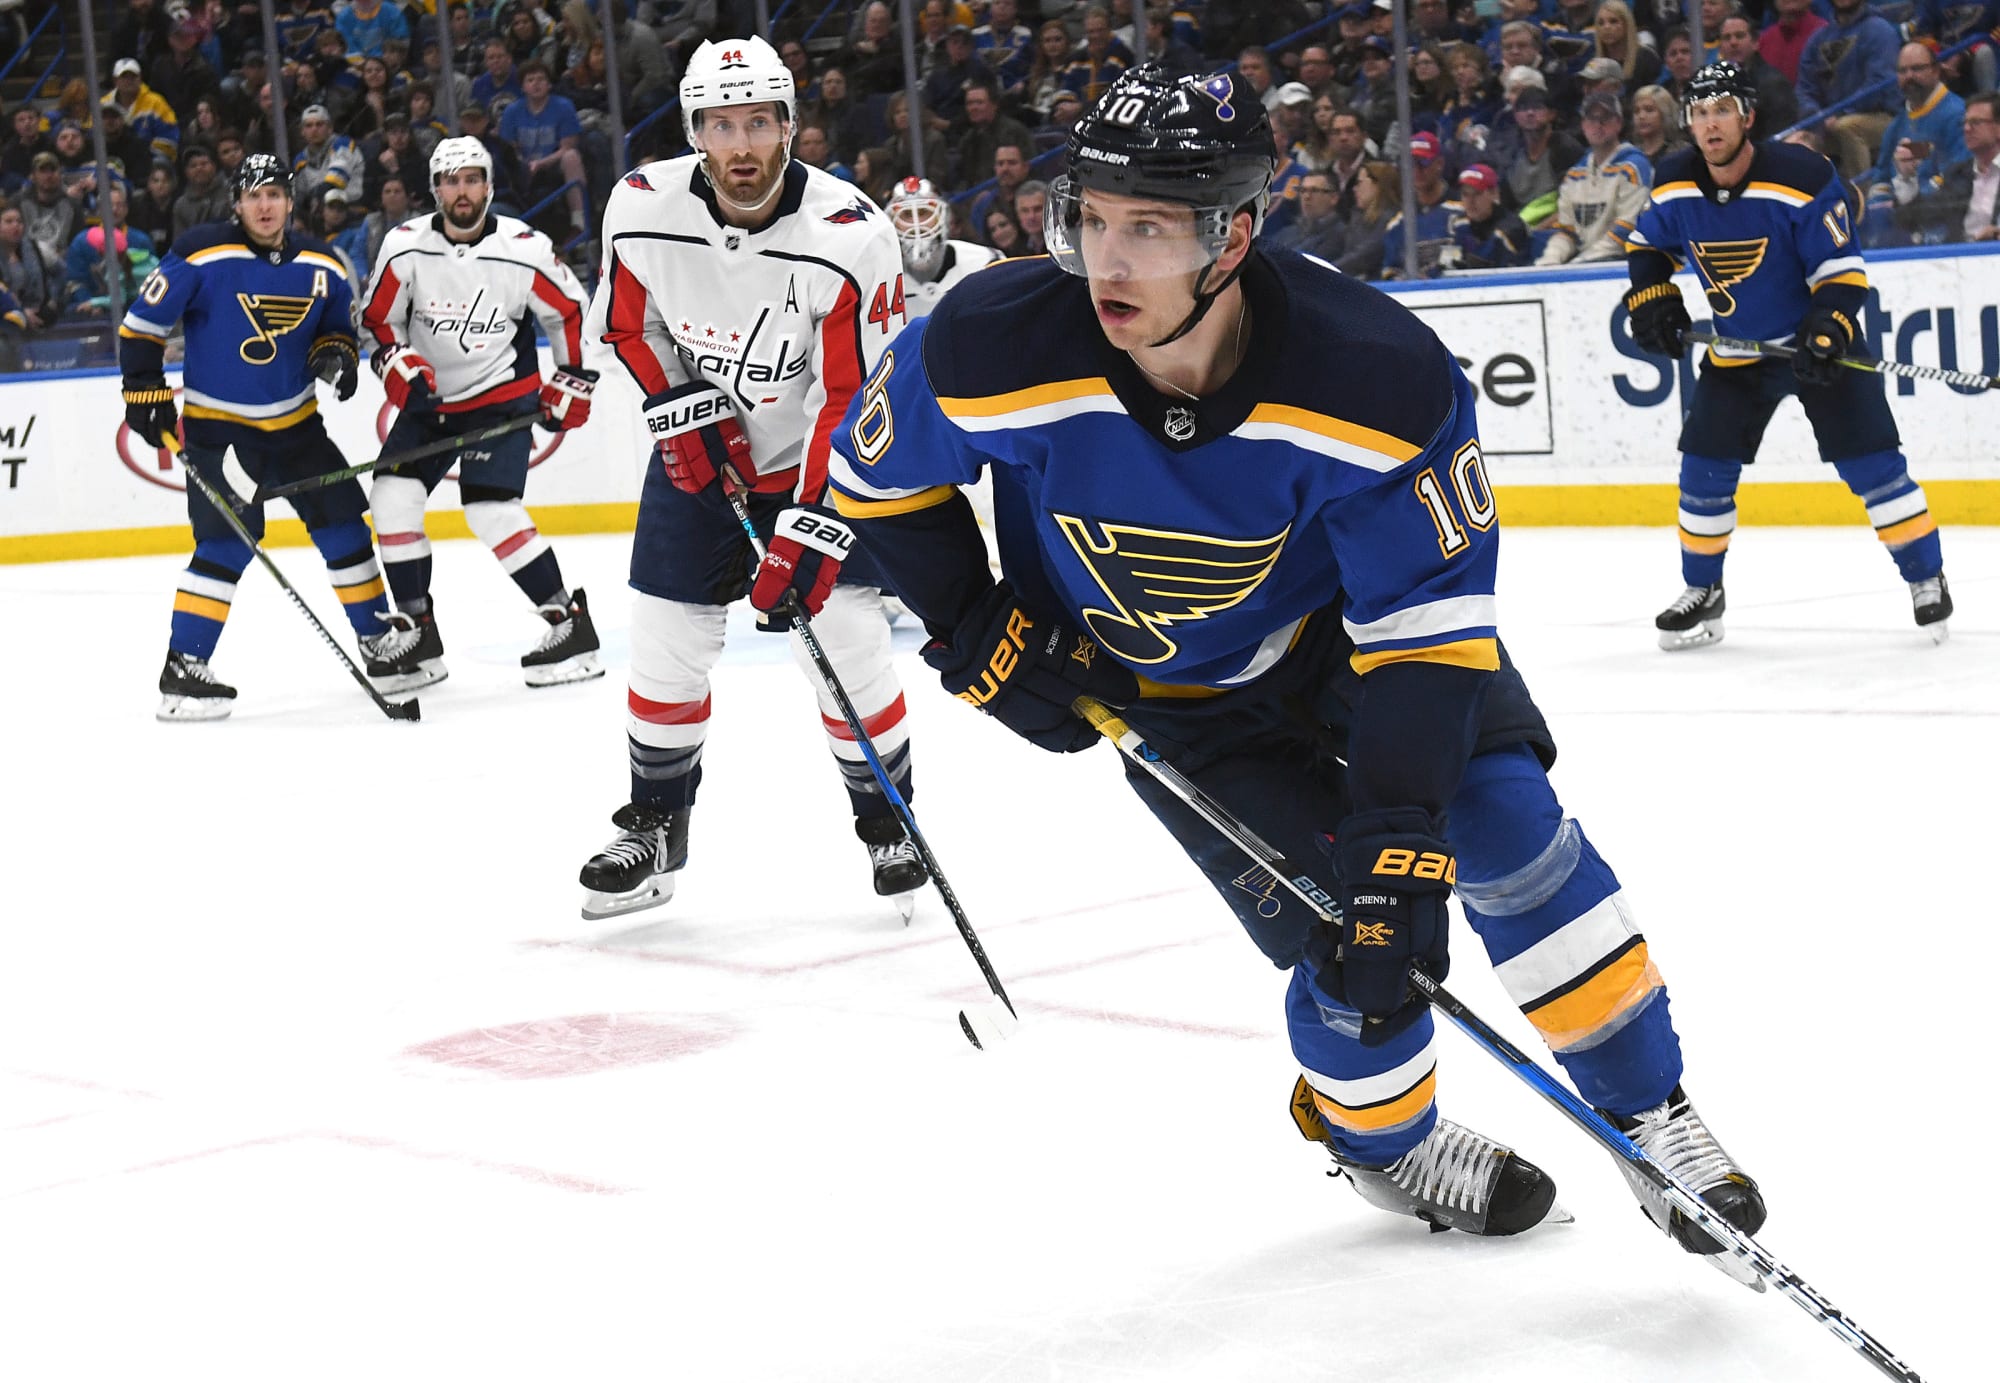 St. Louis Blues Continue Tradition Of Facing Champ In Preseason